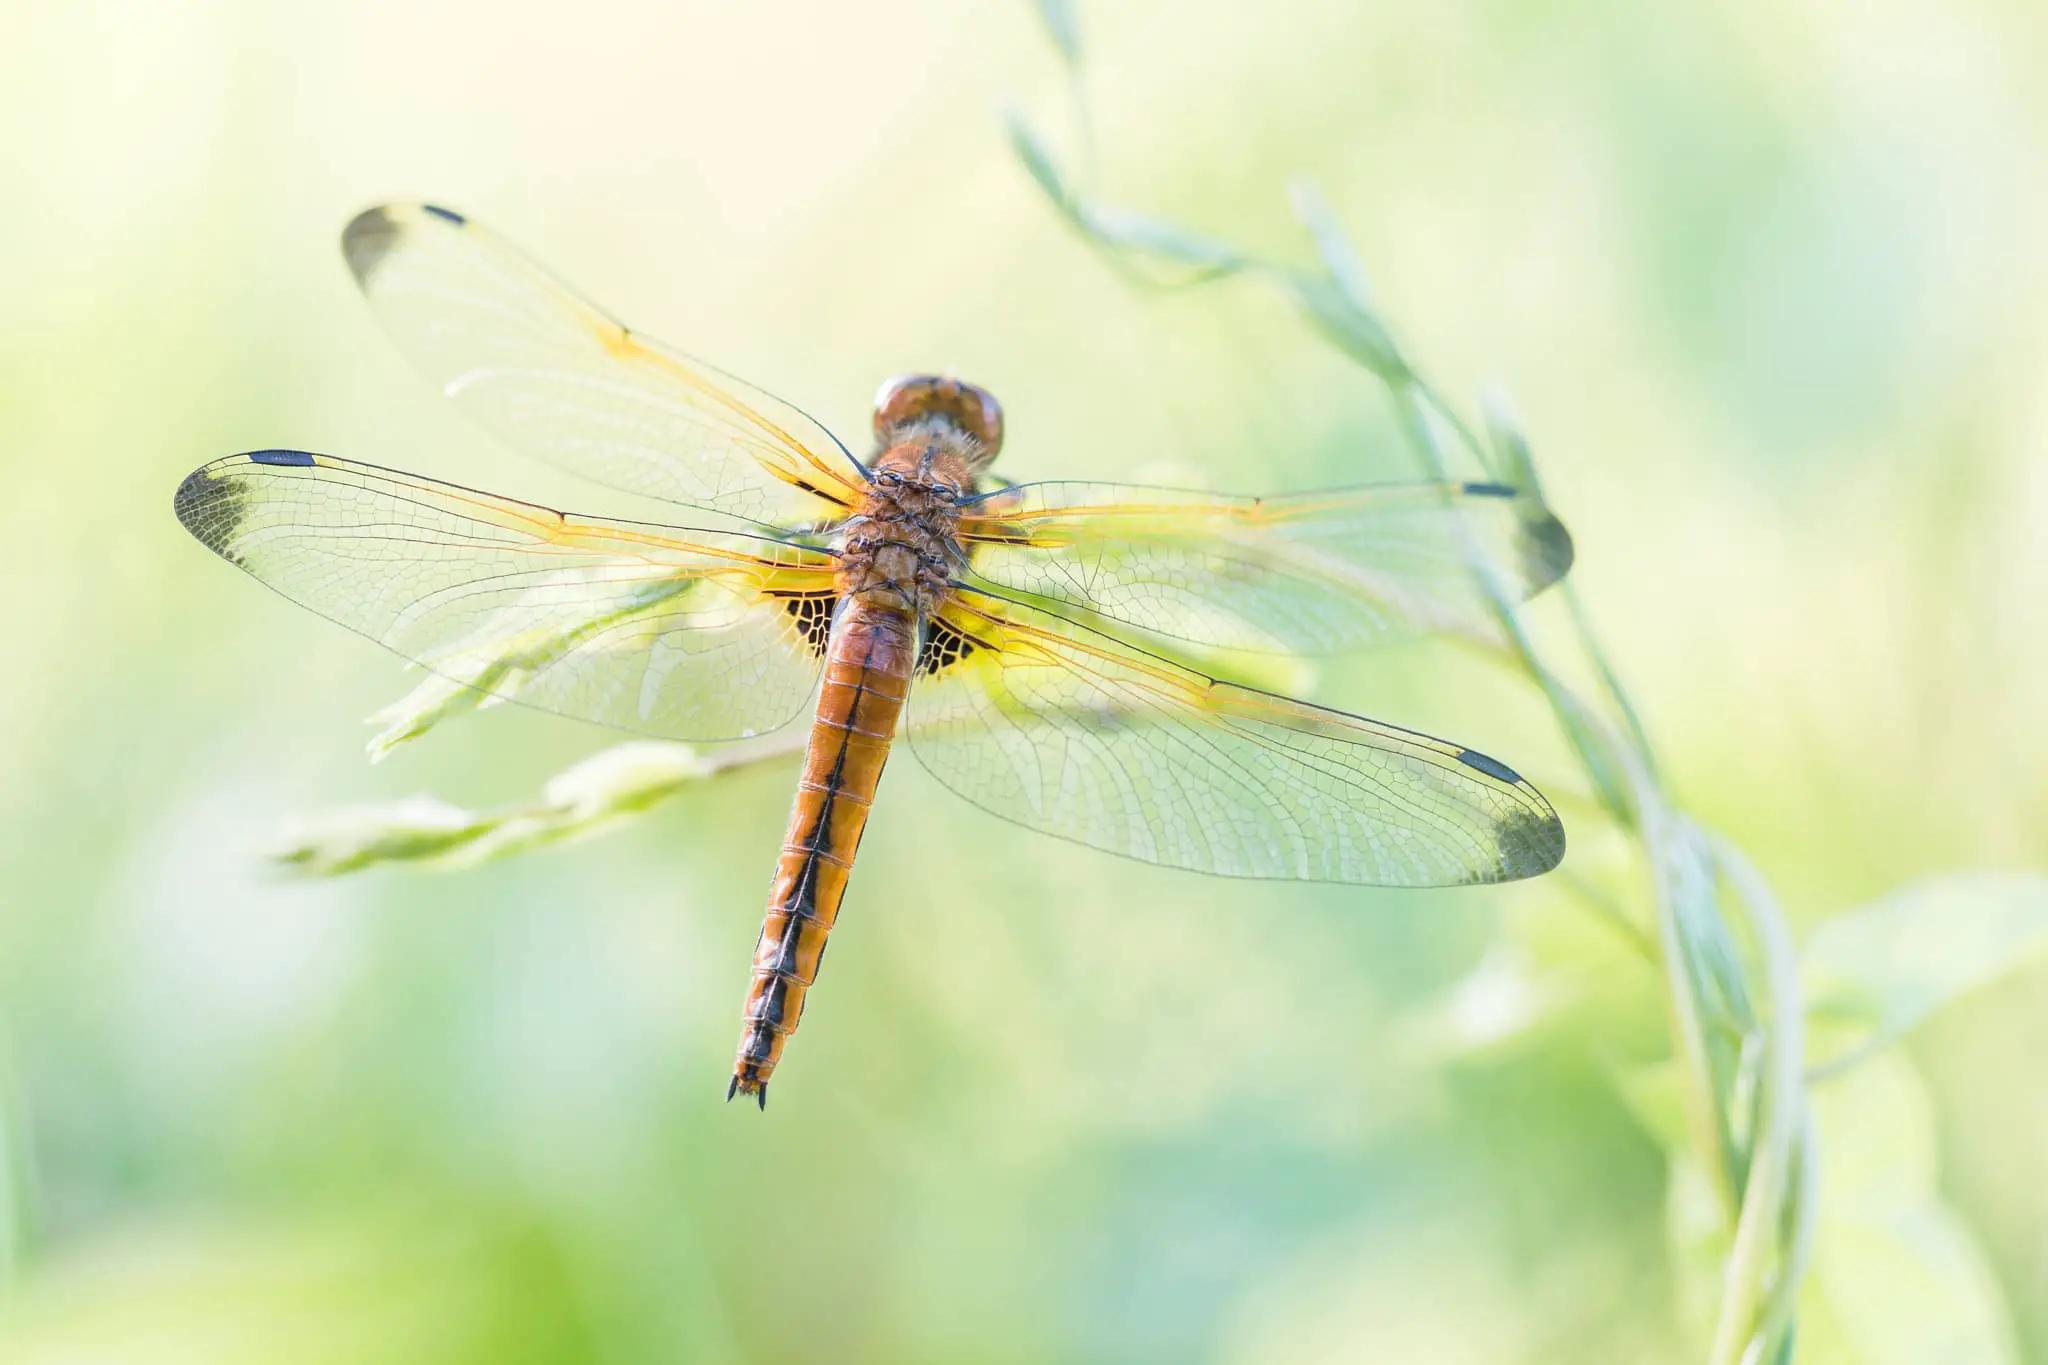 Scarce Chaser Dragonfly on the stem of a flower